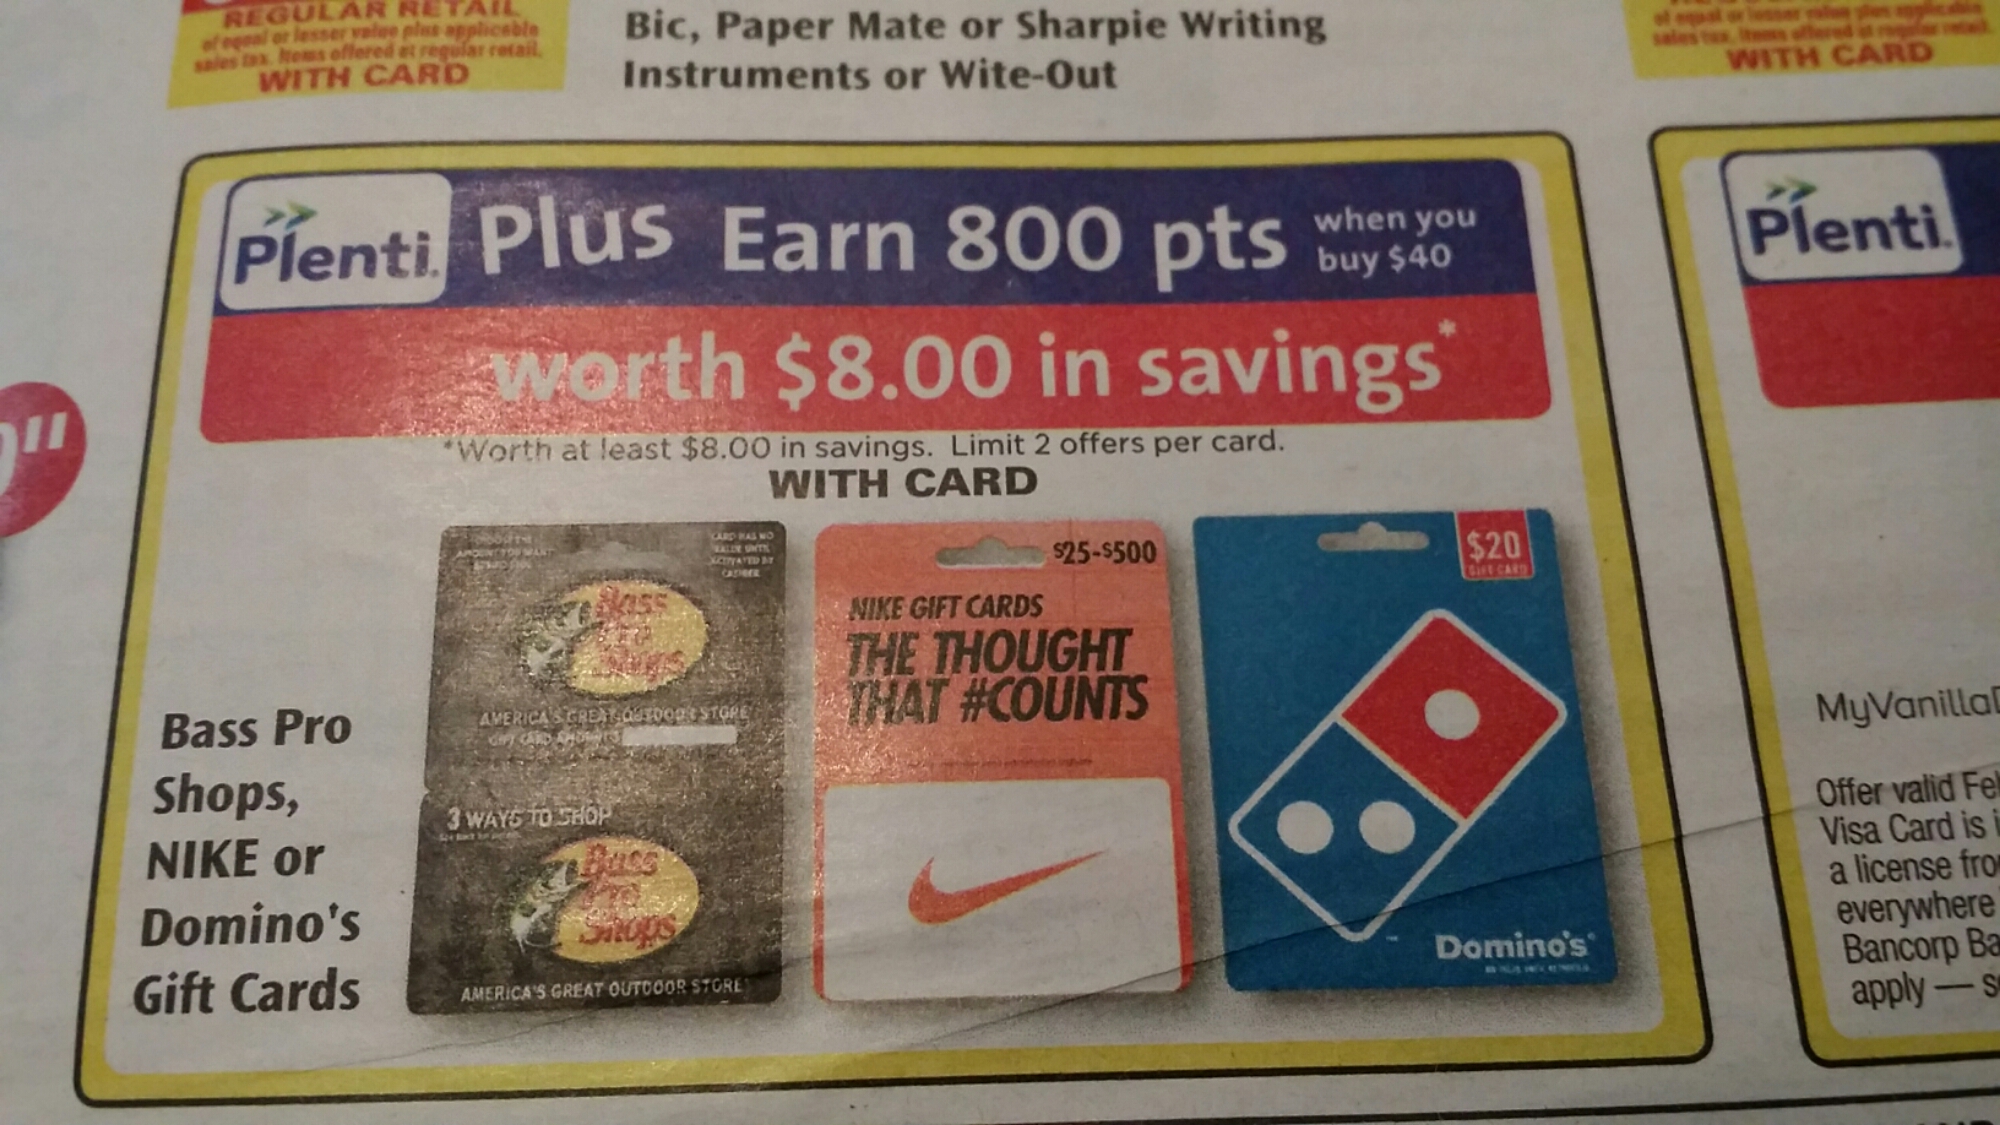 32-for-40-in-gift-cards-rite-aid-3-27-jerseycouponmom-com